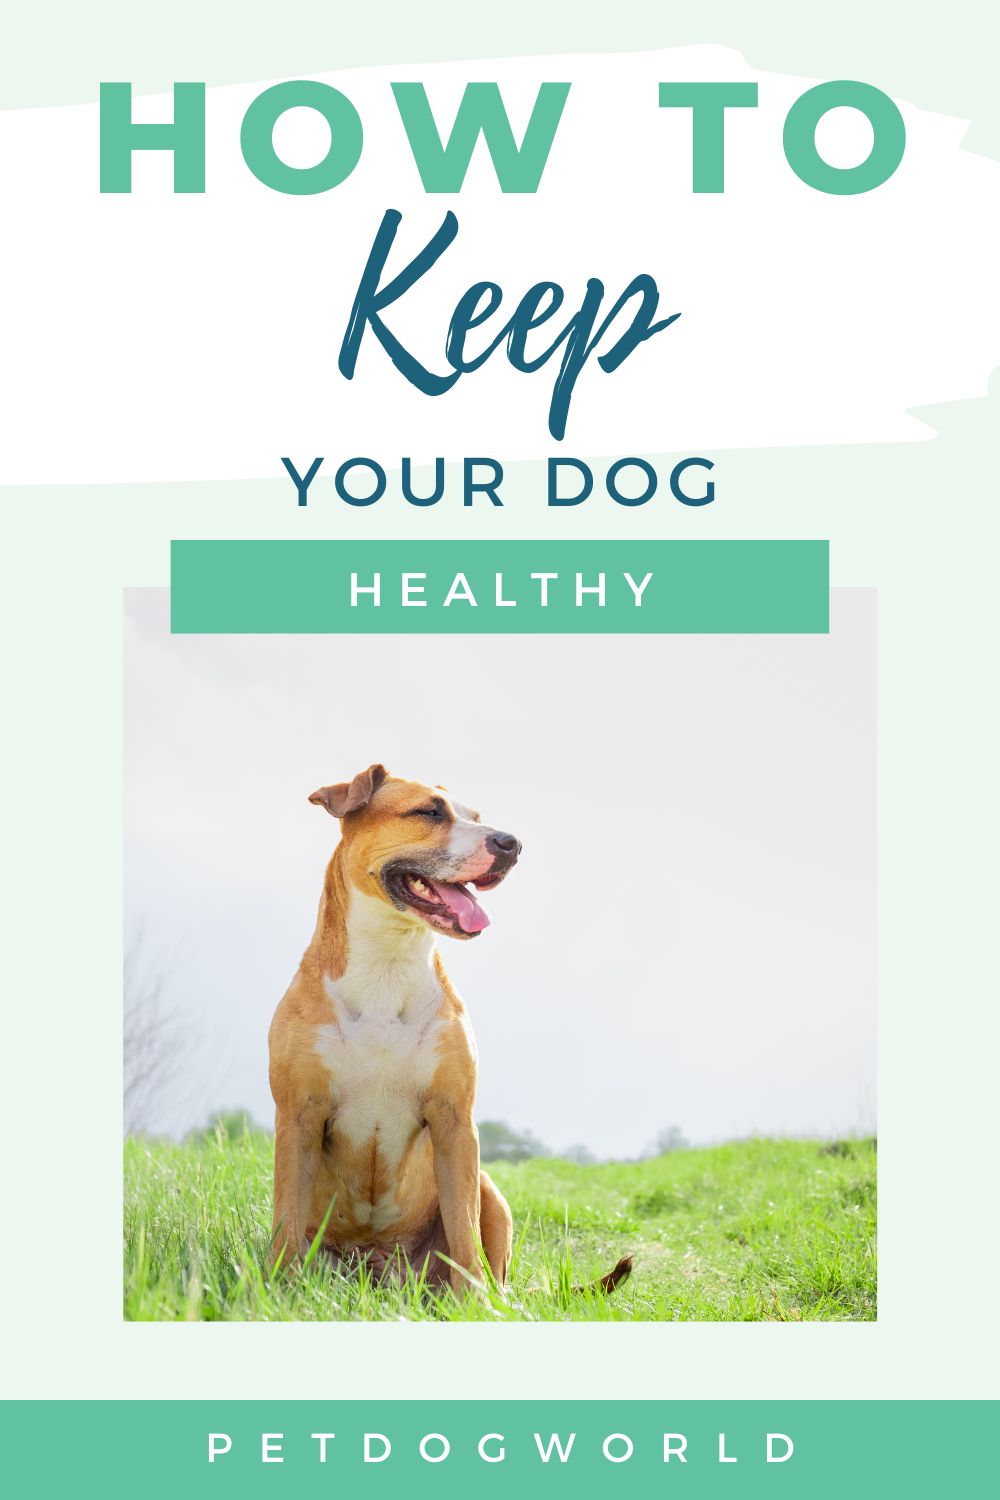 If you want to keep your dog healthy and happy over its lifetime, read on for some helpful tips.